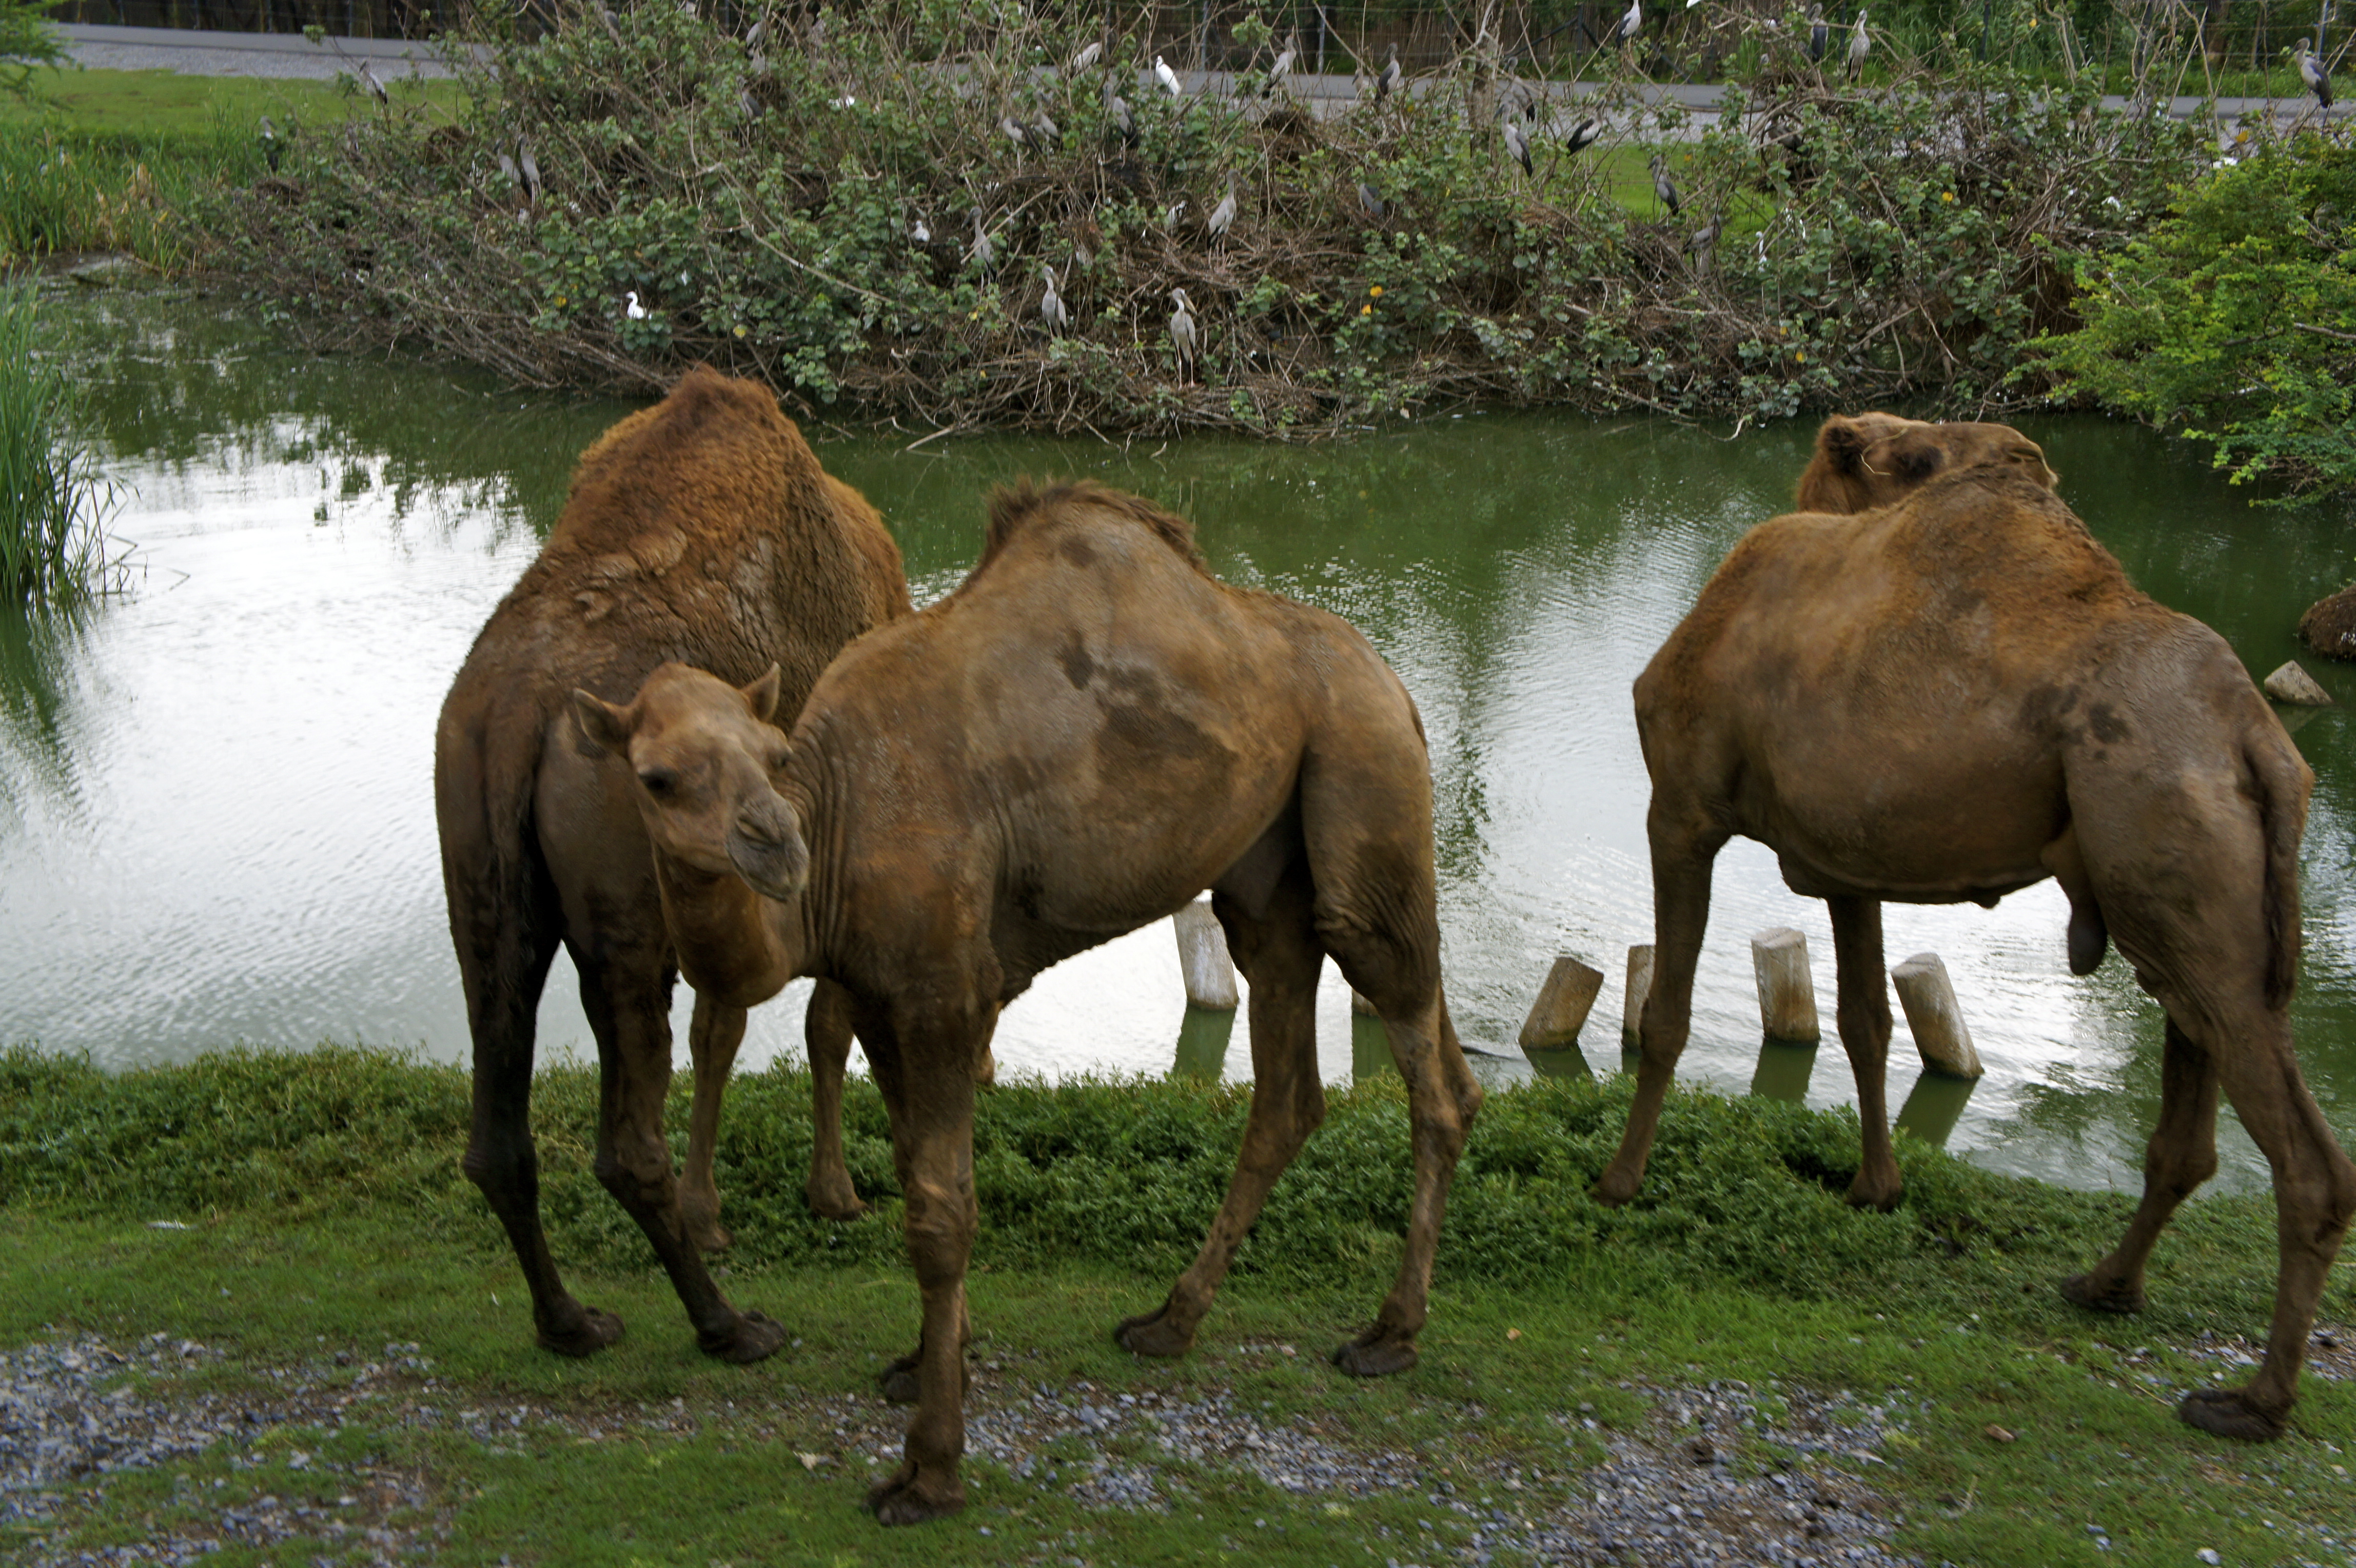 Camels photo